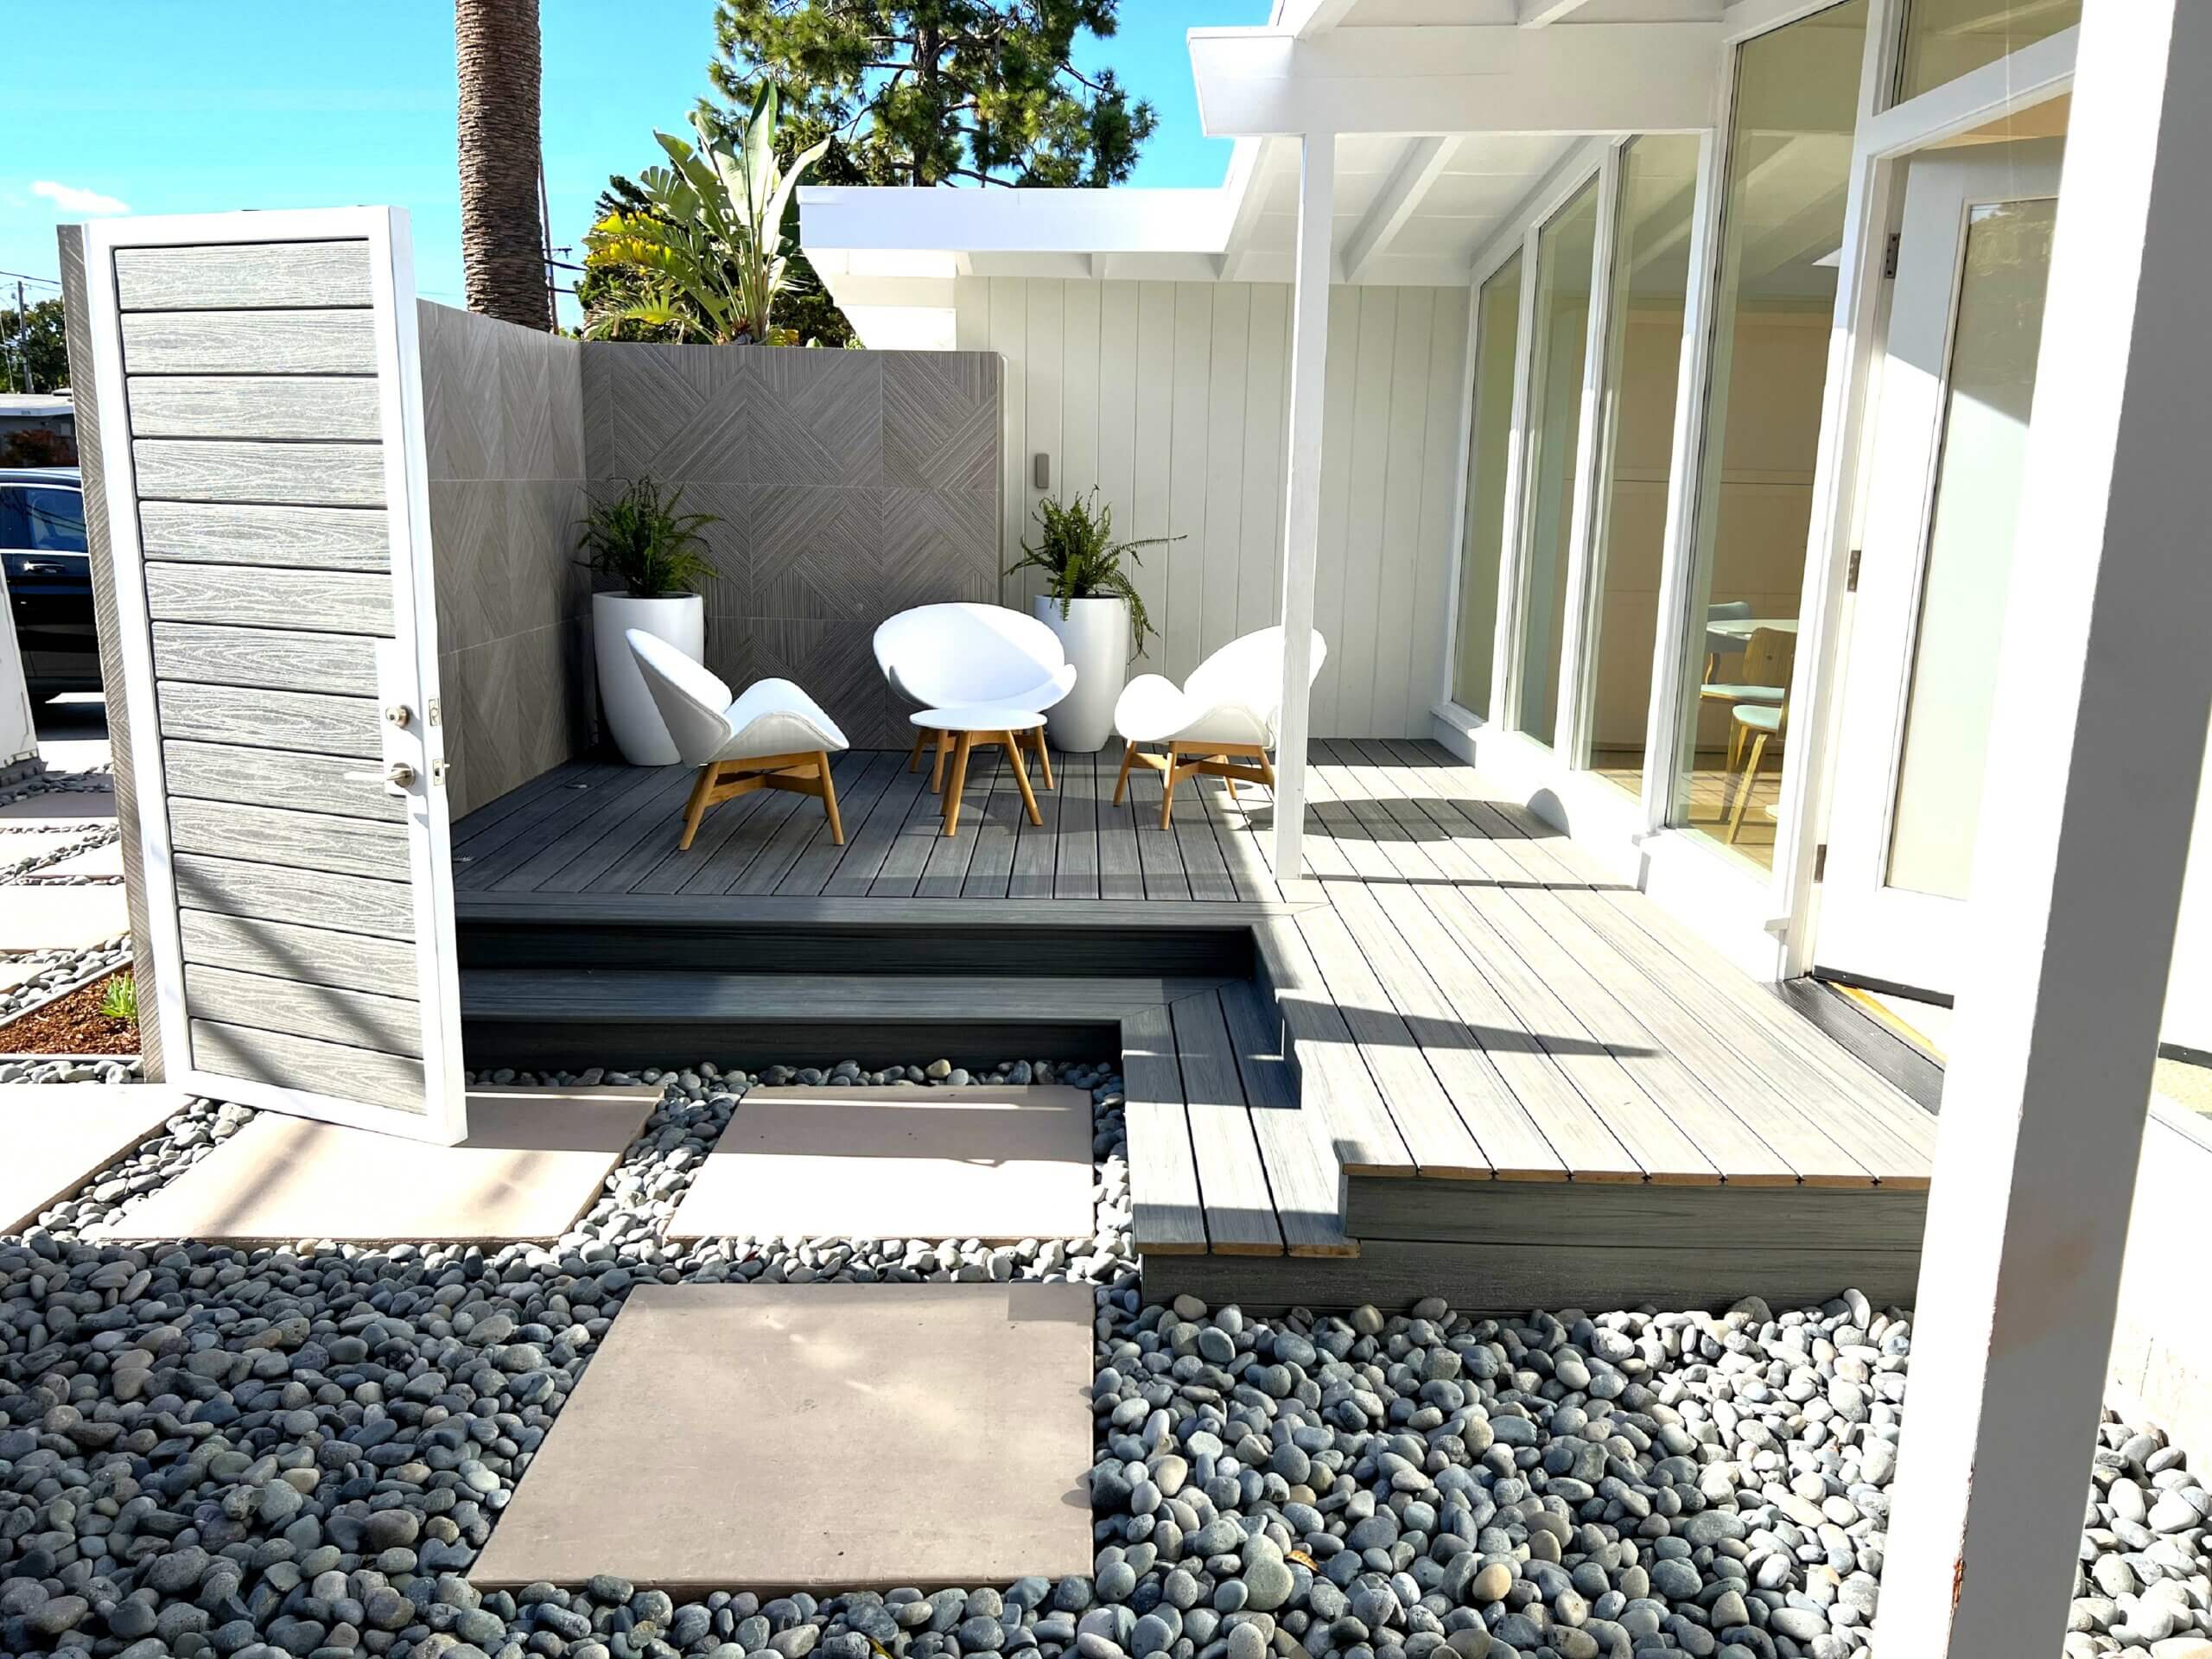 Eichler home landscape remodel with front entrance exterior deck within courtyard